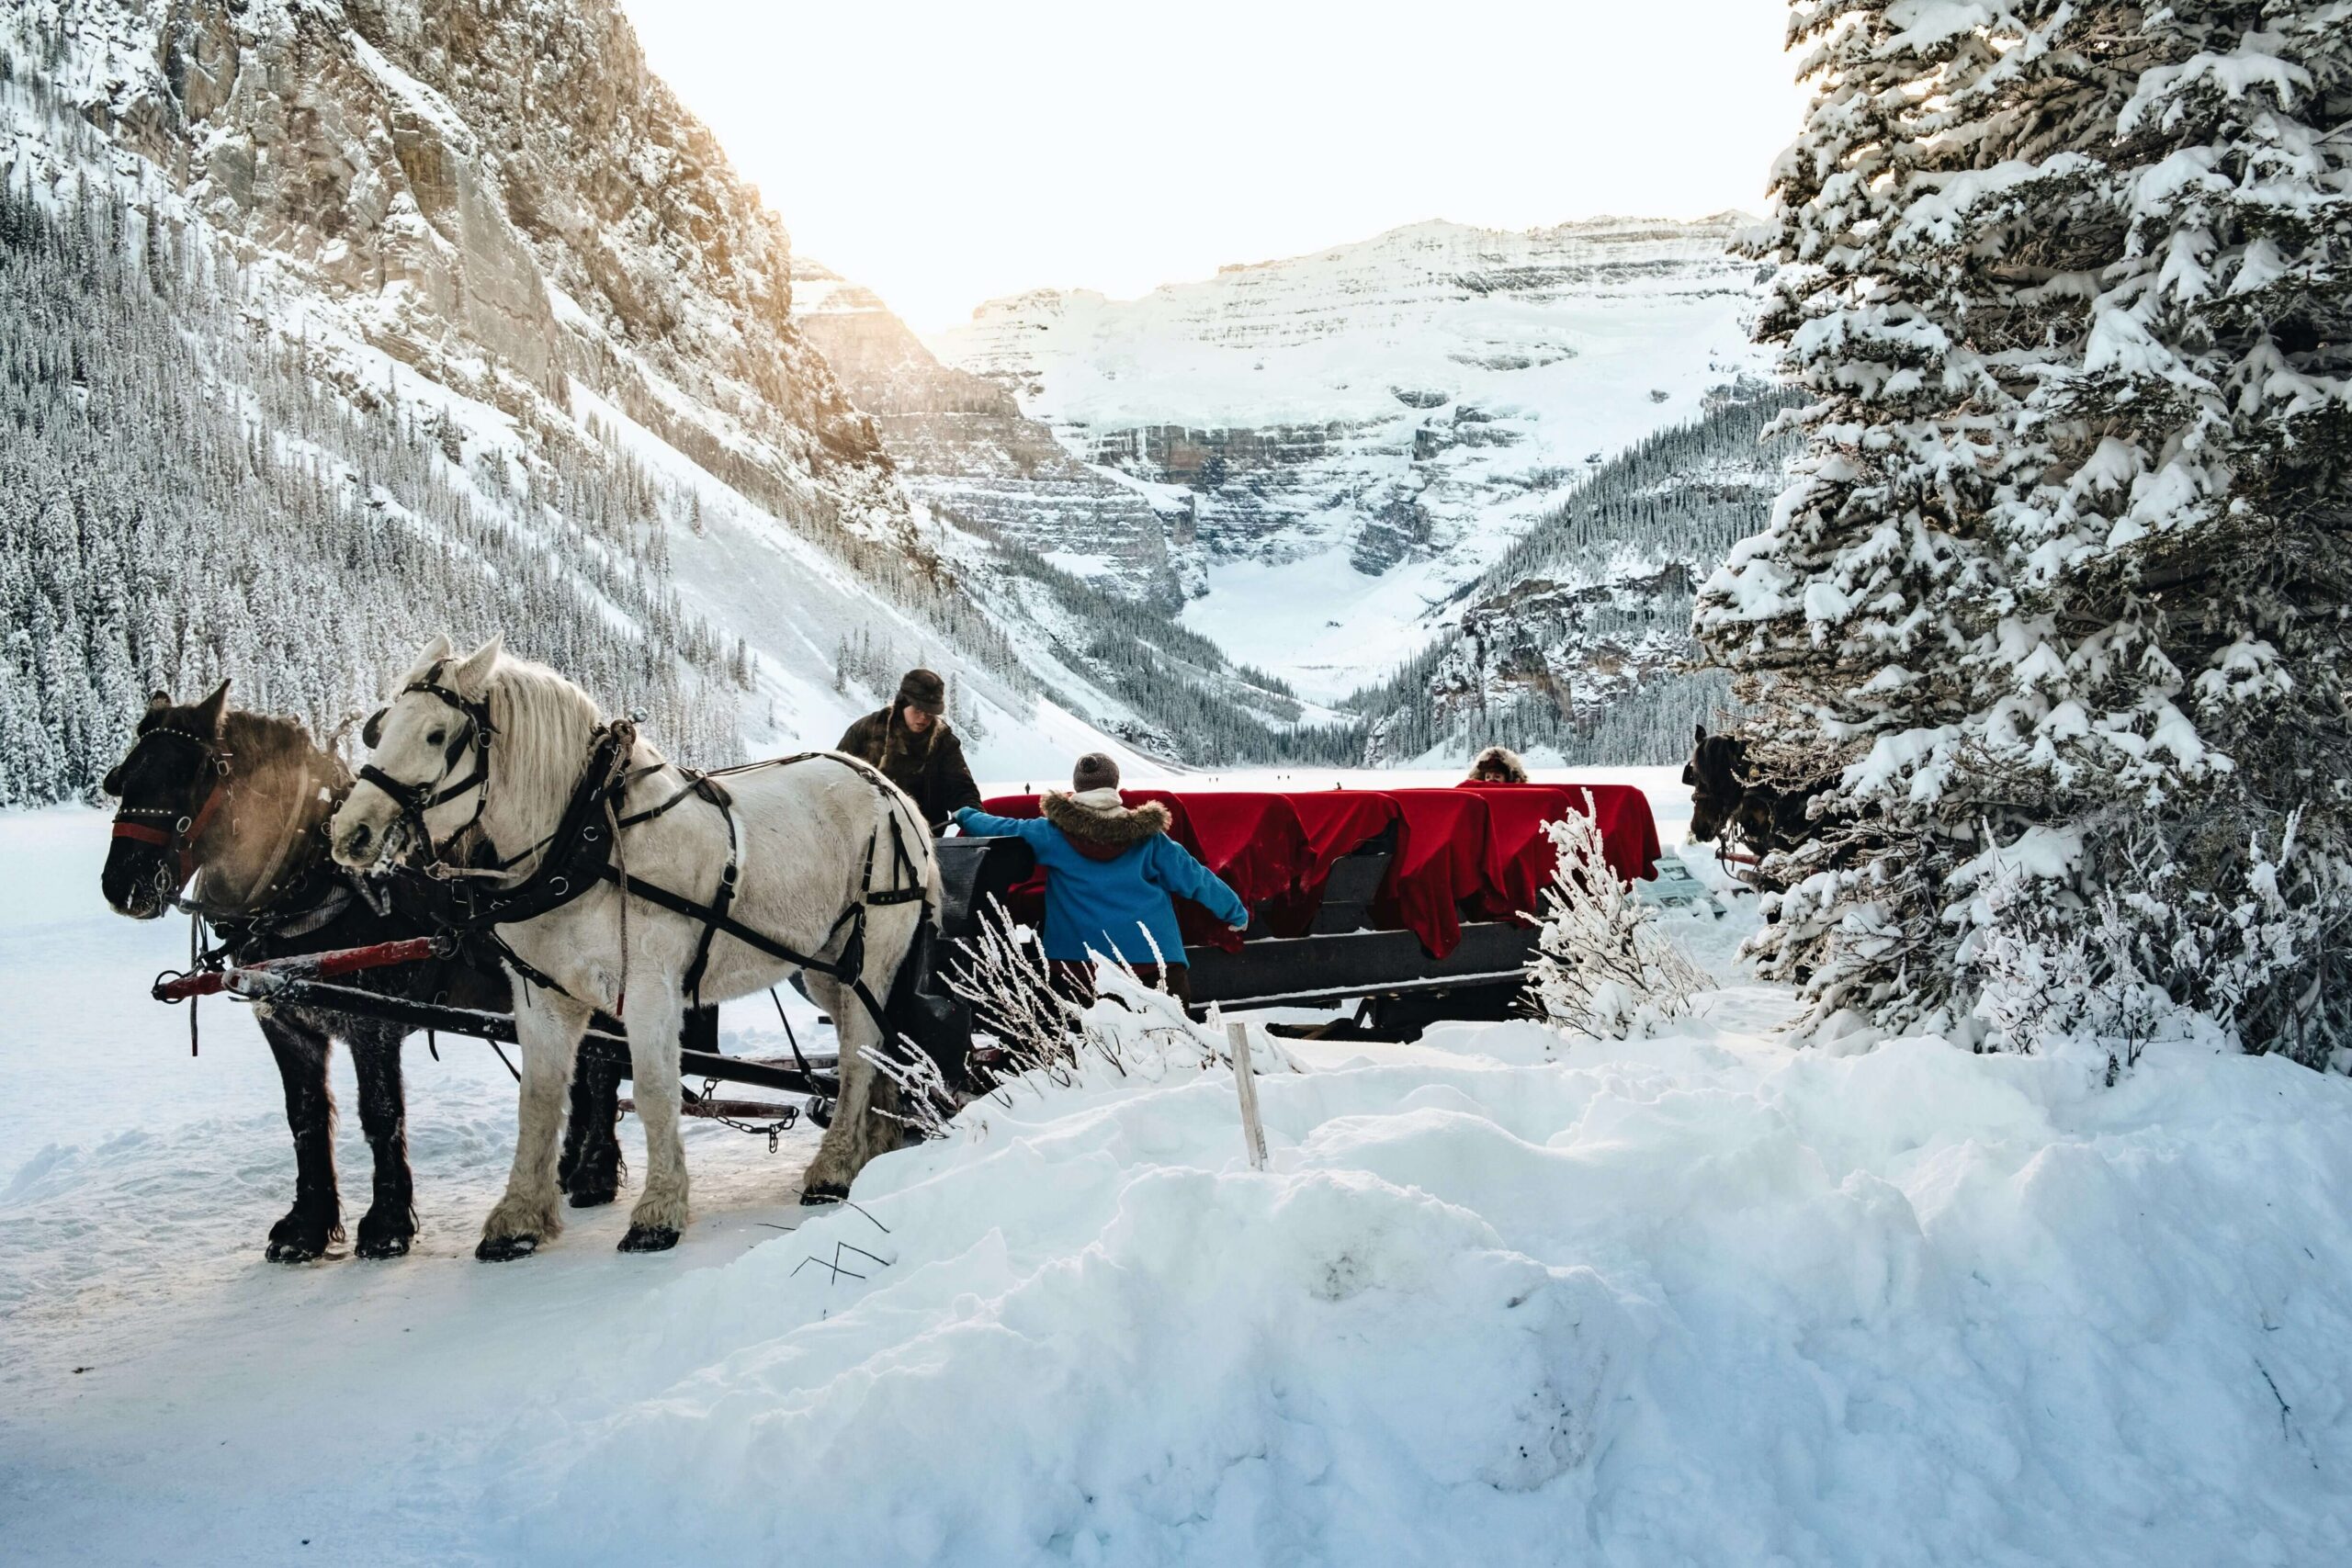 Take Your Team for an Enchanting Winter Sleigh Ride along the shores of Alberta's Famous Lake Louise at the Grizzly Classic Men's Artistic Gymnastics Competition.